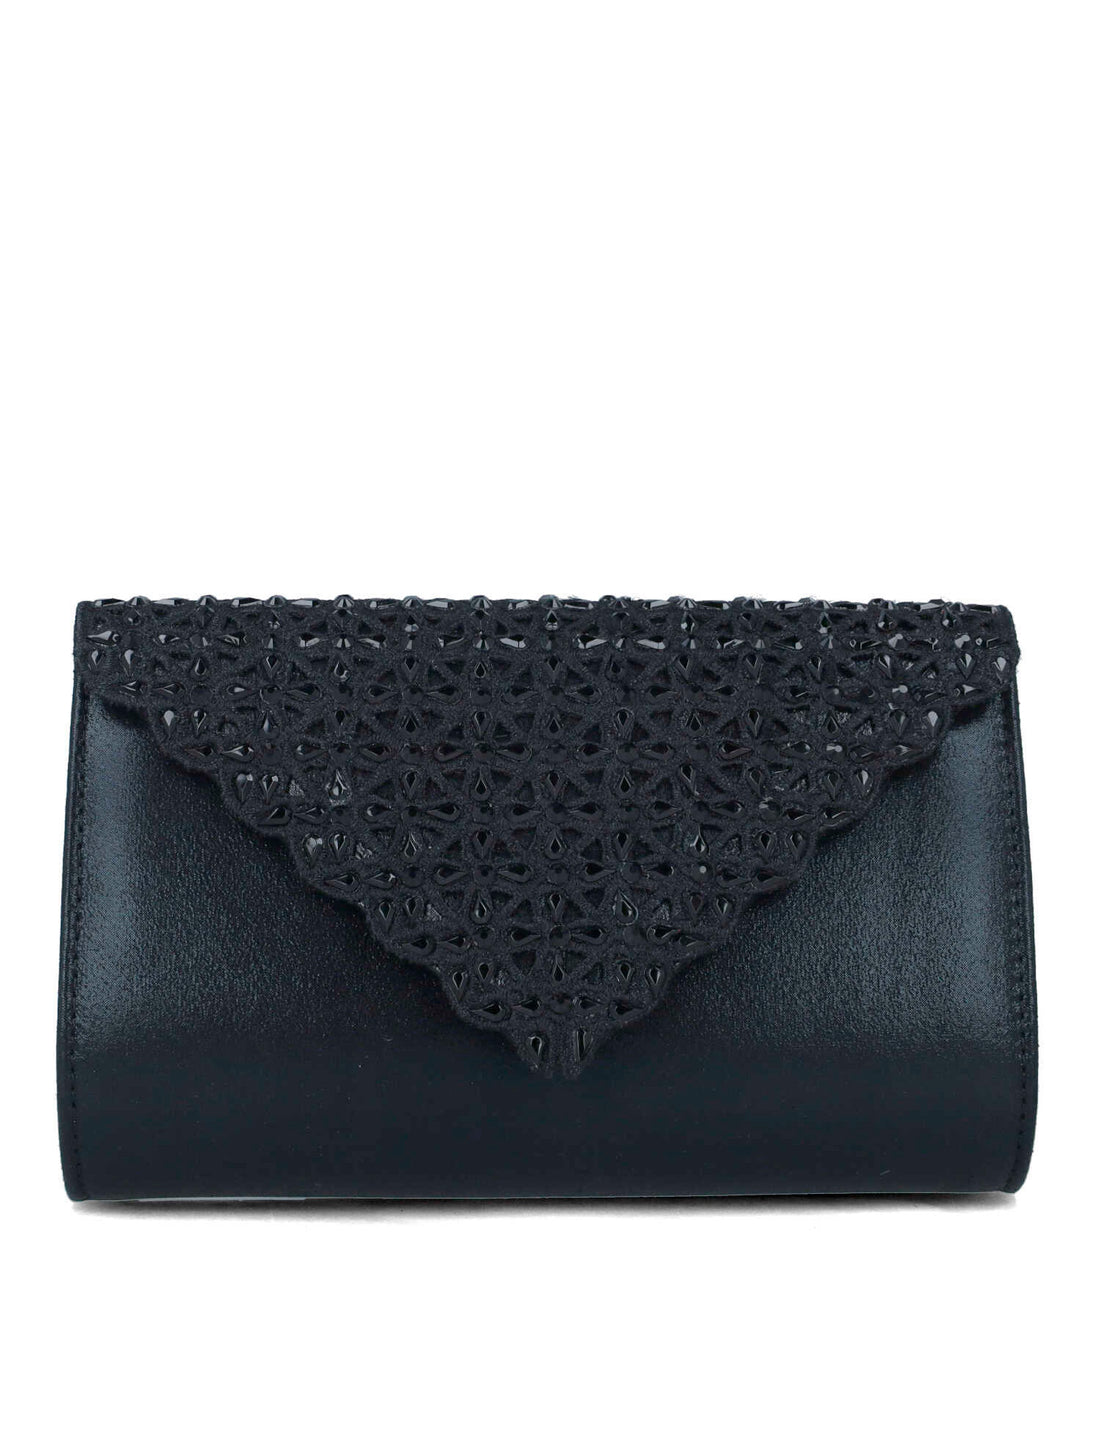 Black Clutch With Embellished Flap_85540_01_01